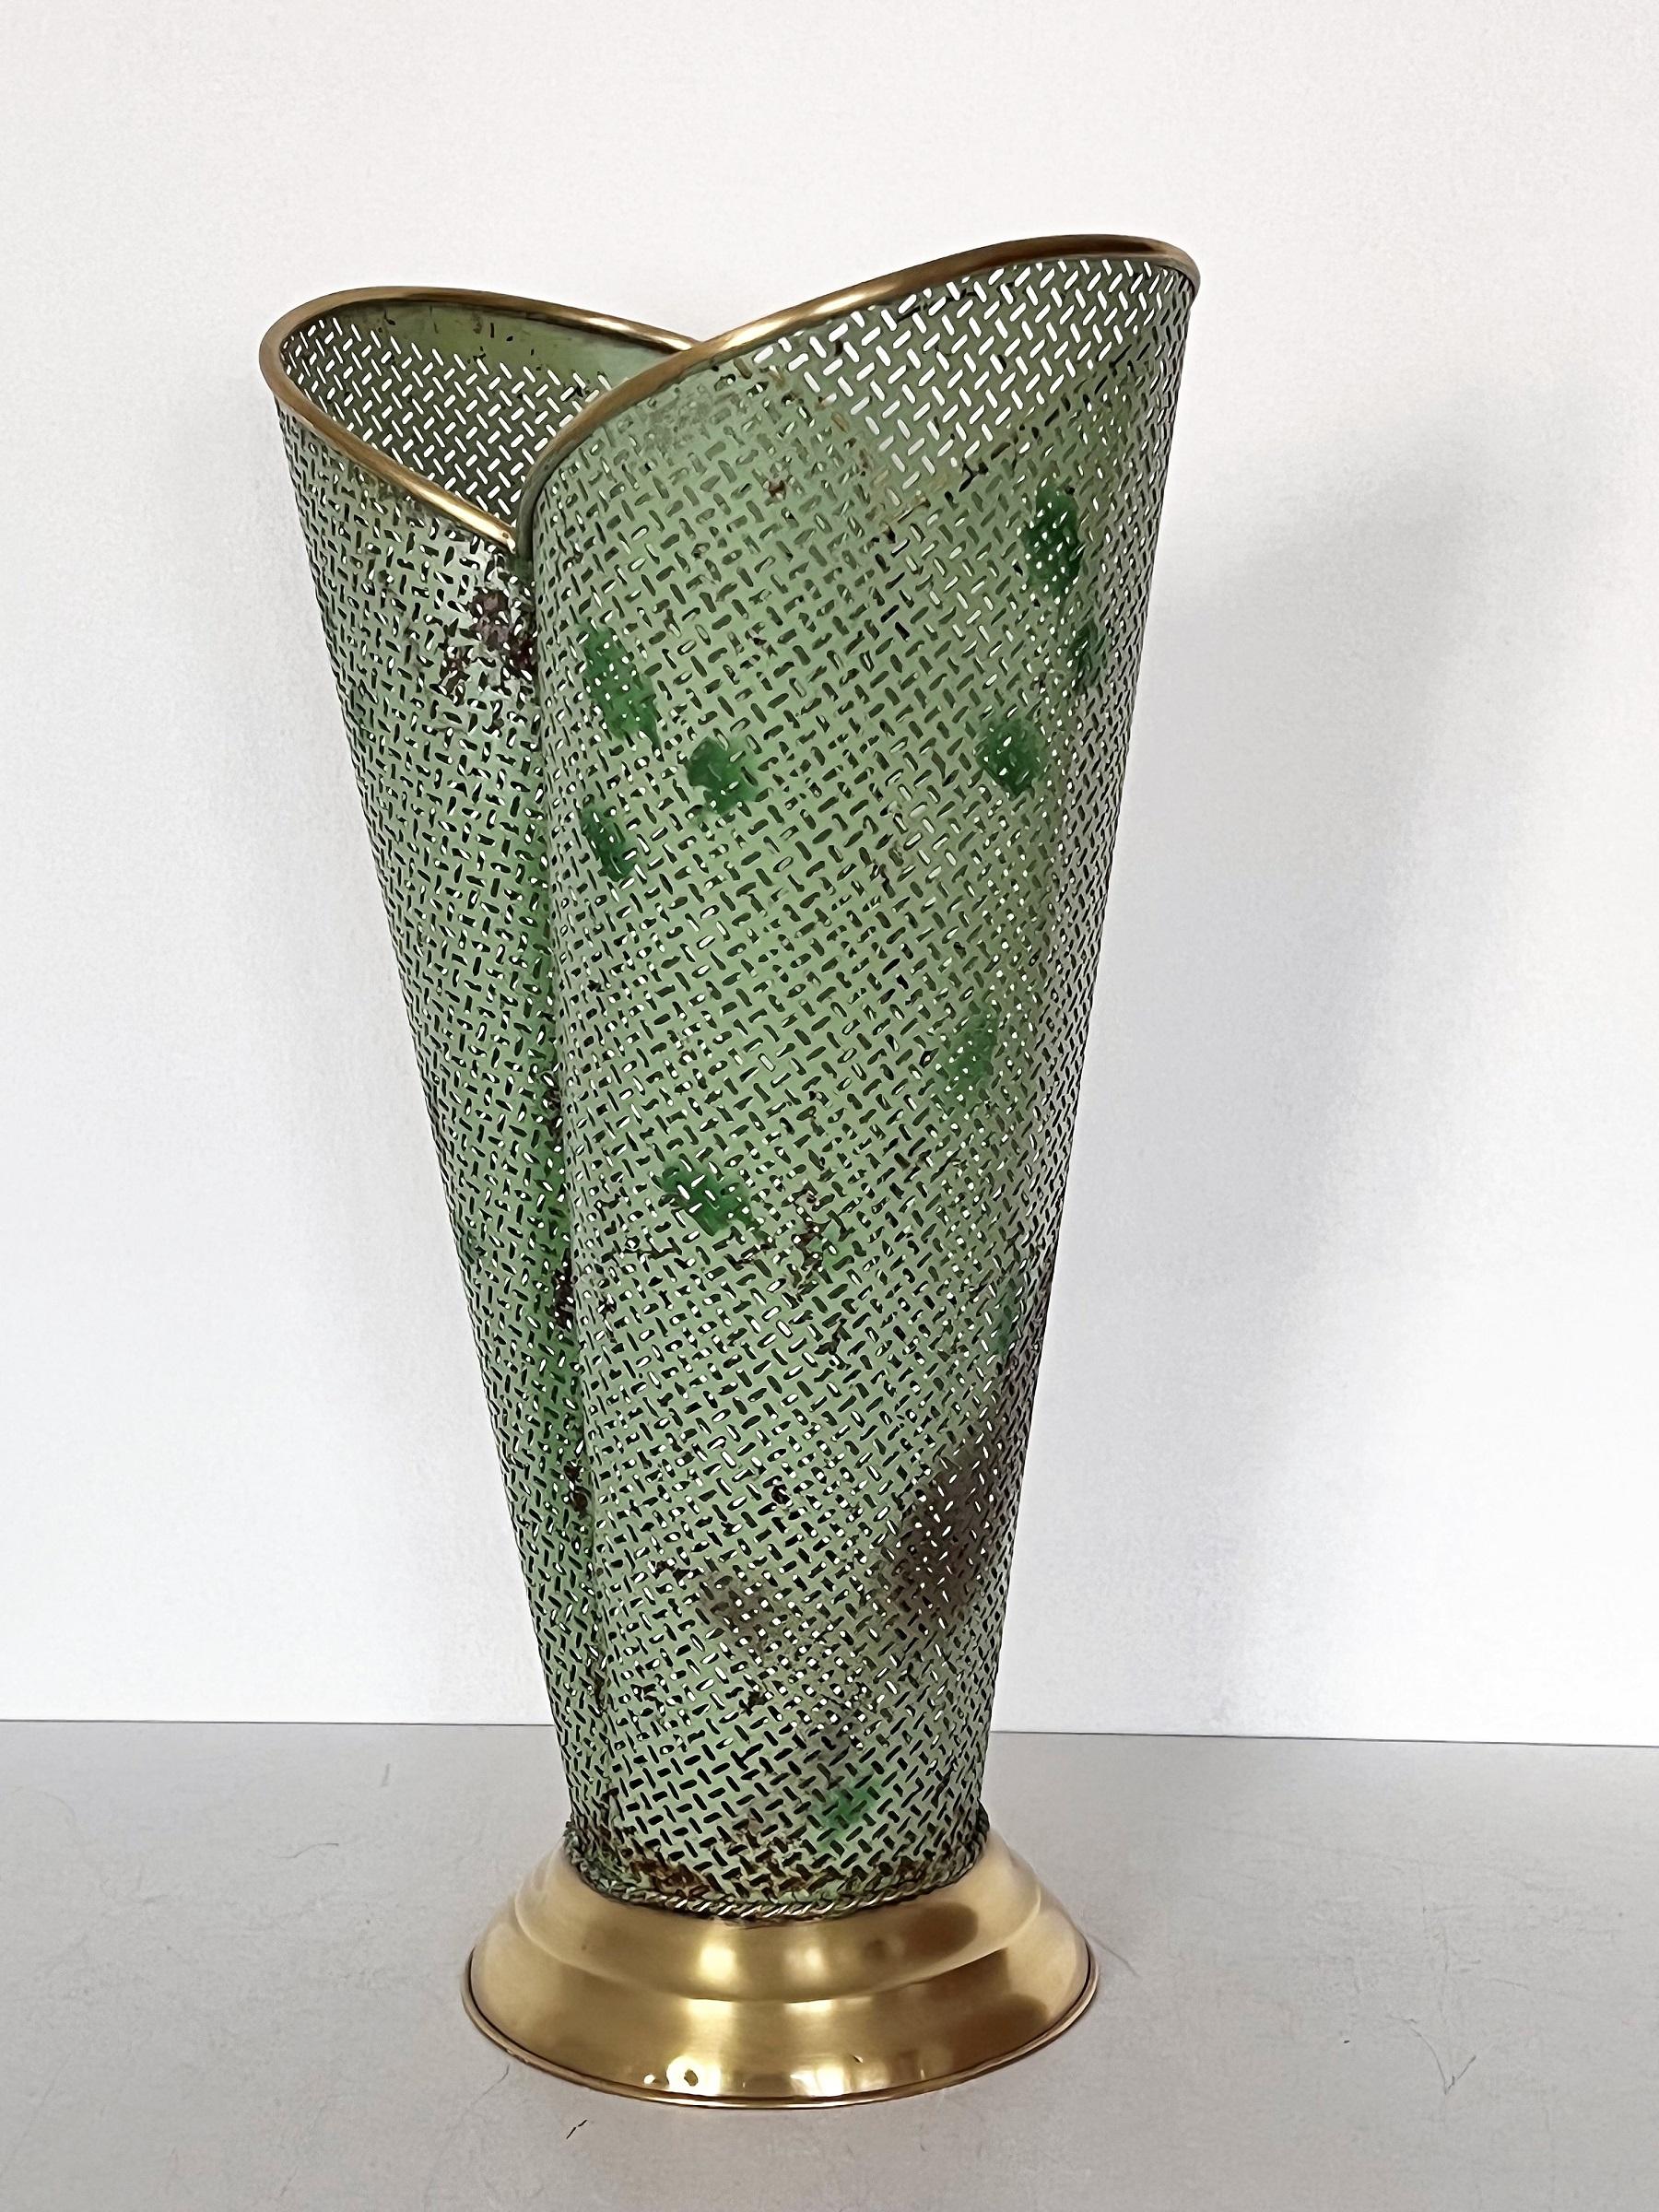 Beautiful umbrella stand, Made in Italy in the mid-century.
Made of perforated sheet metal with shiny brass borders and shiny brass base.
The perforated metal is lacquered in light green color with dark green color spots and rusty spots